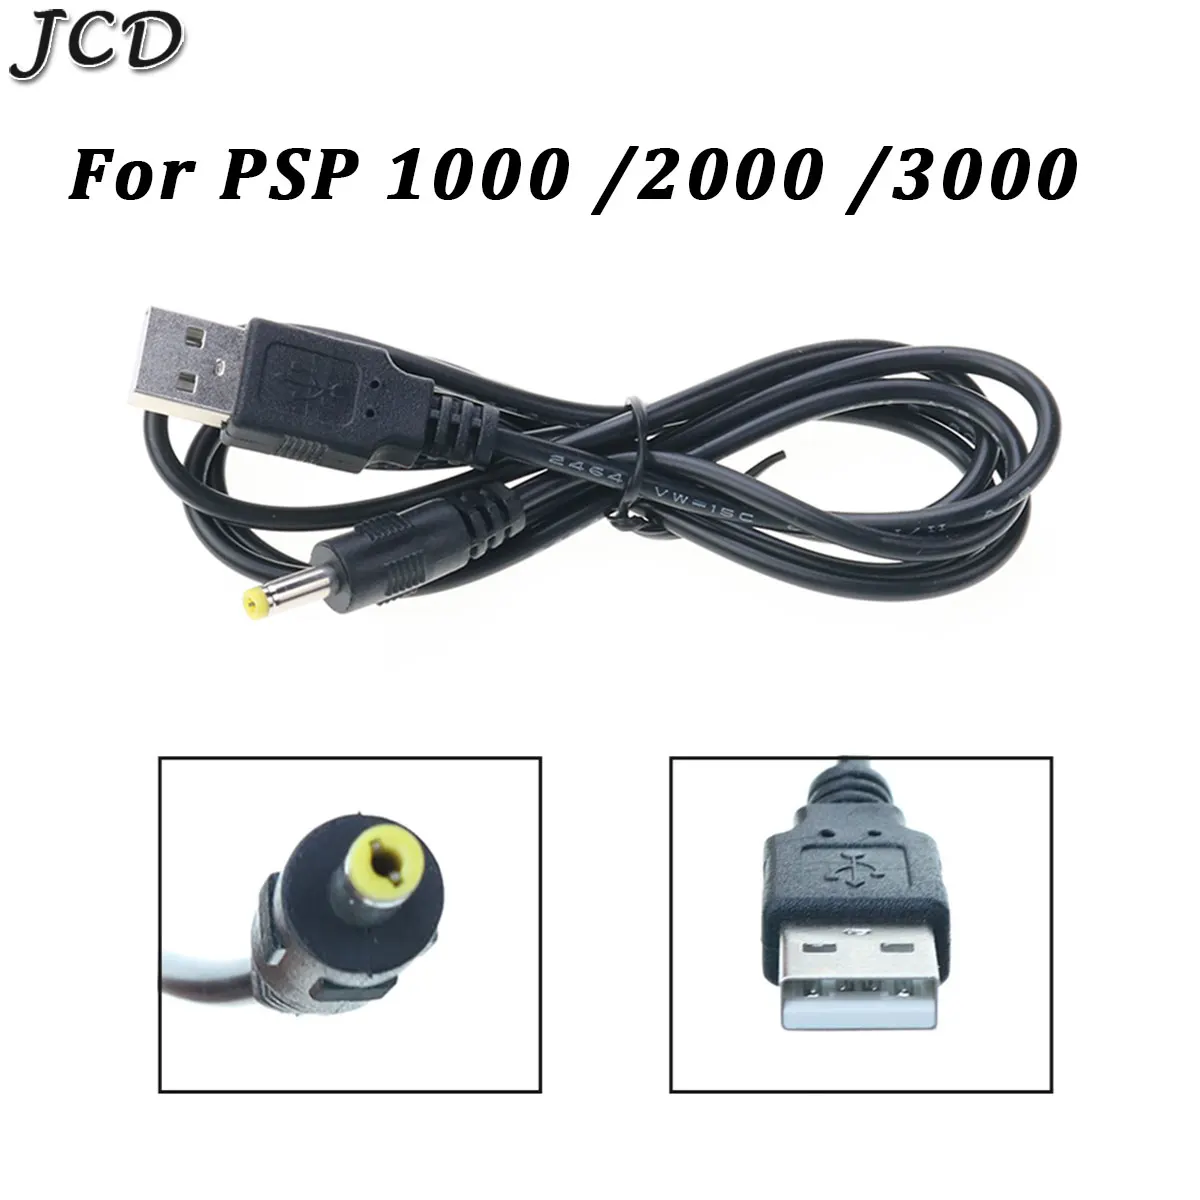 

JCD 1.2m 5V USB A to DC Power Charging Cable Charge Cord for Sony PSP 1000/2000/3000 Barrel Jack Power Cable Connector